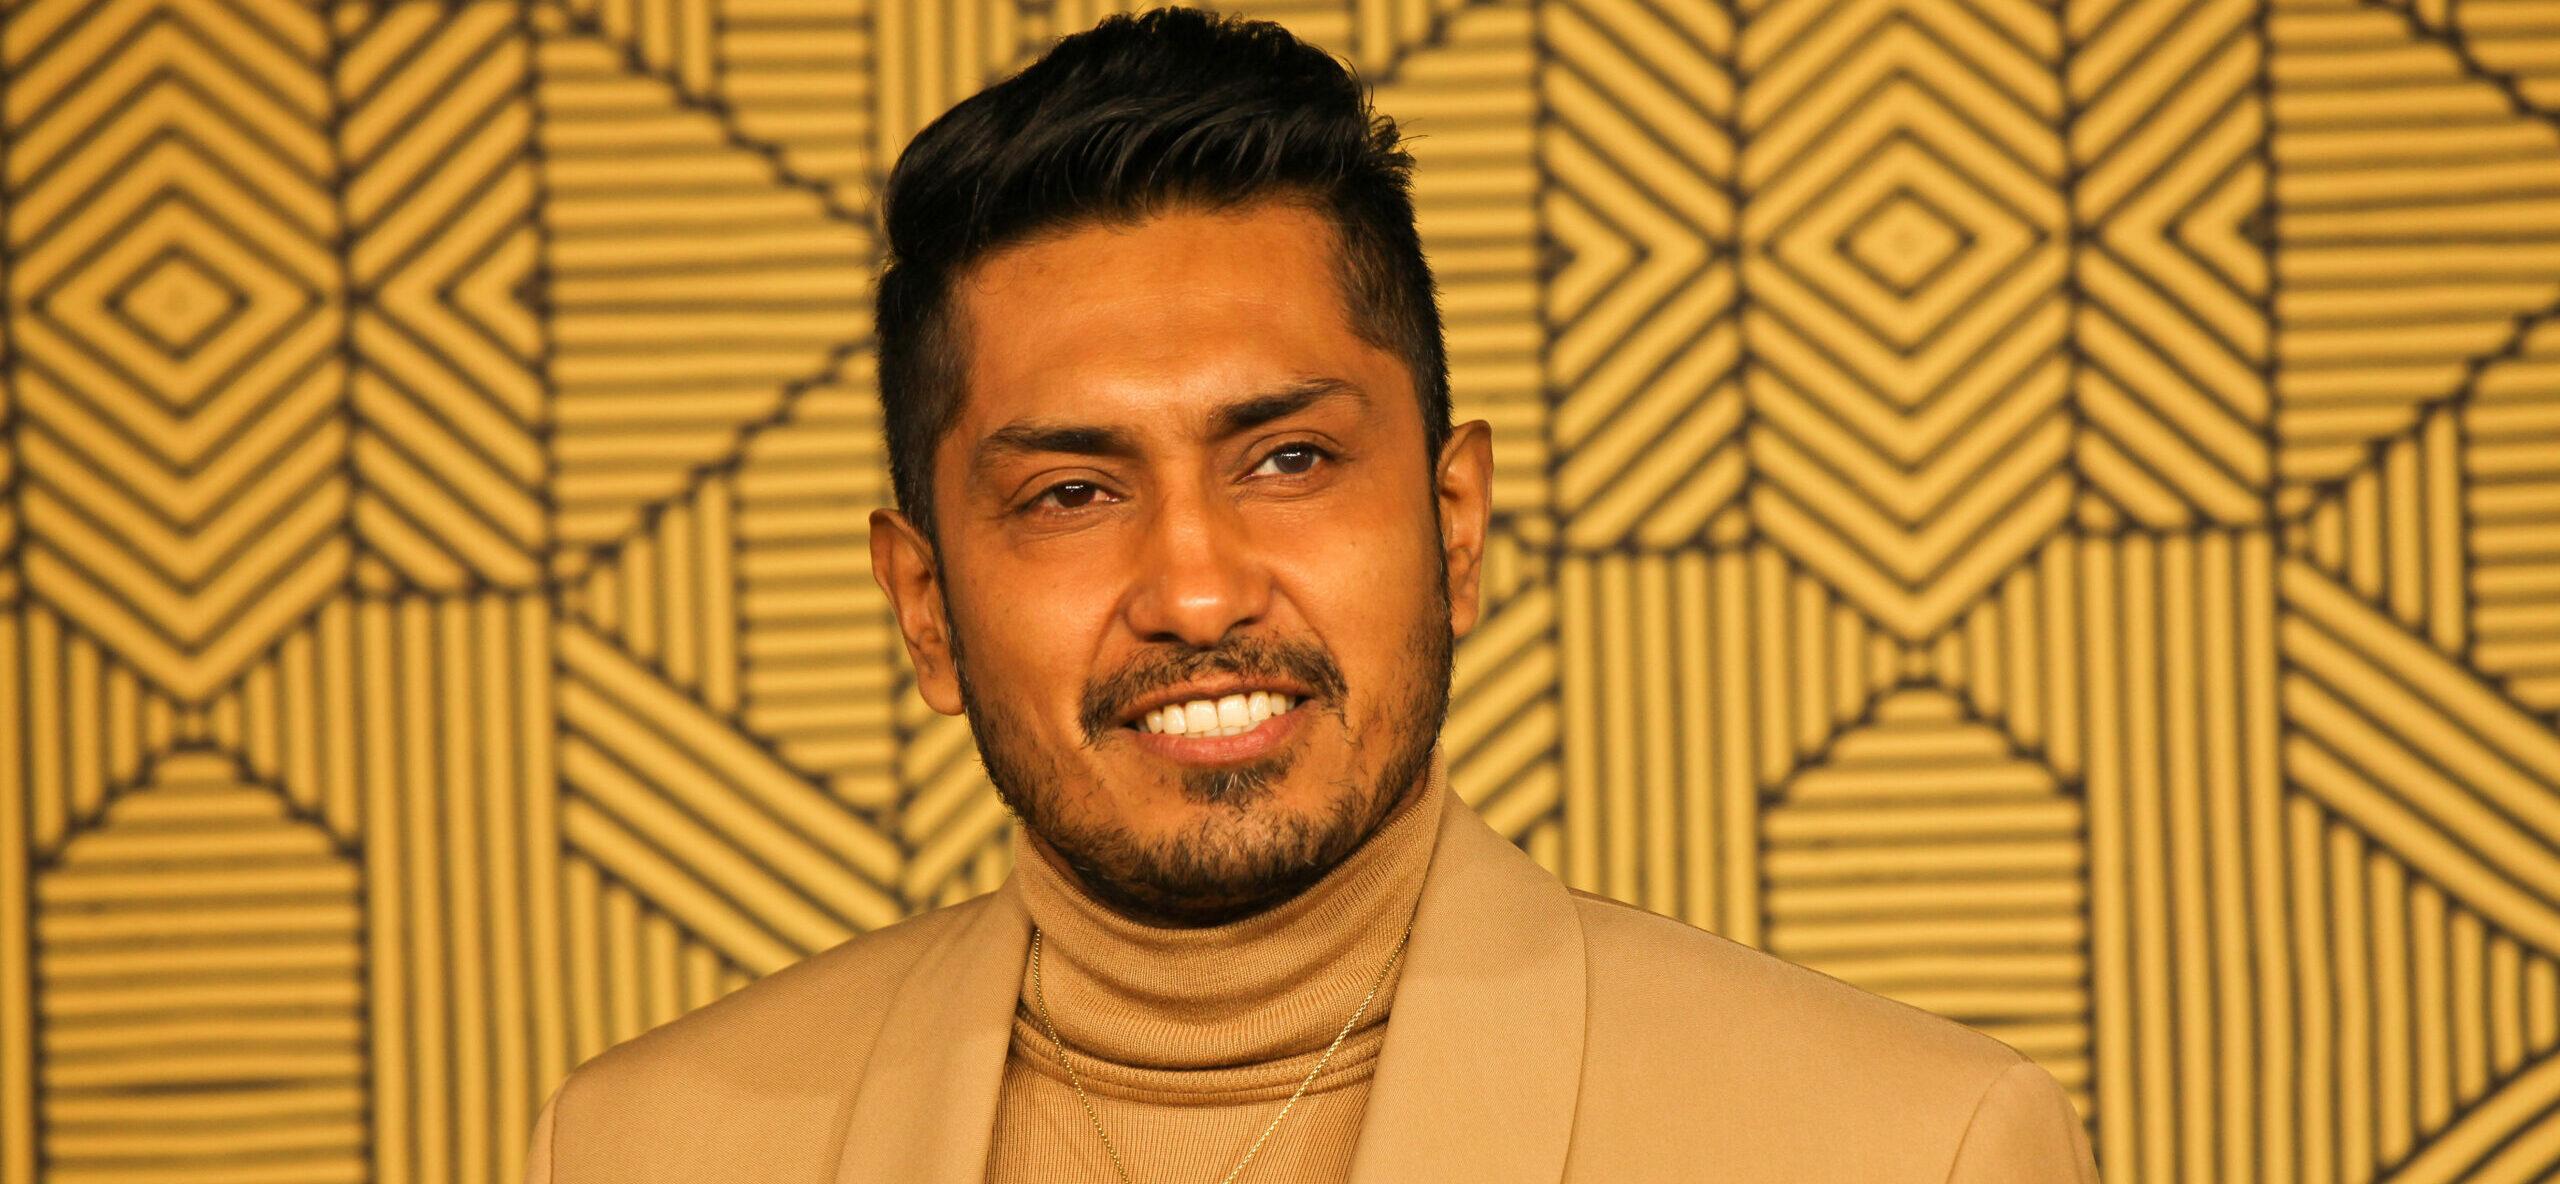 ‘Black Panther 2’ Star Tenoch Huerta Denies His ‘Bulge’ Was Edited Out Of Movie